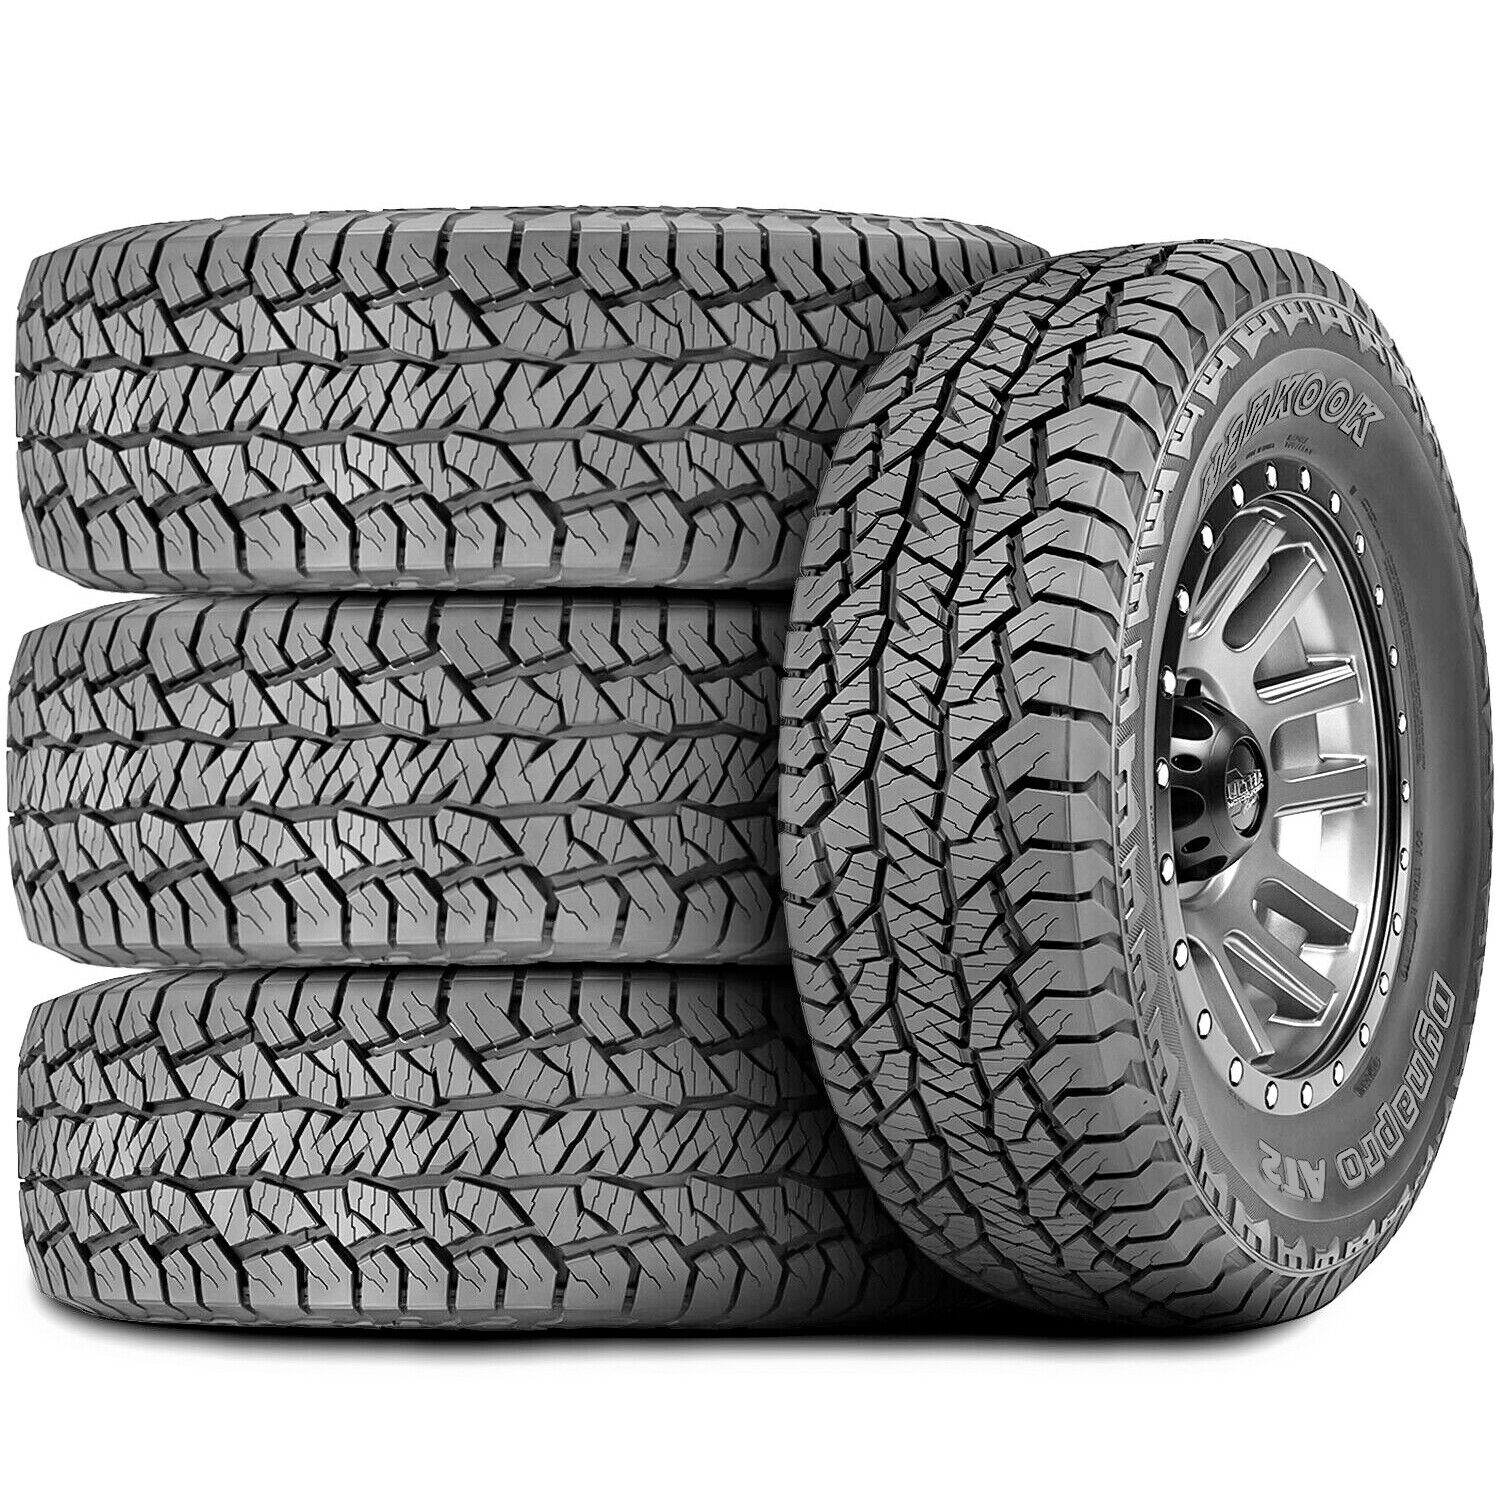 4 Tires Hankook Dynapro AT2 LT 265/70R18 Load E 10 Ply A/T All Terrain